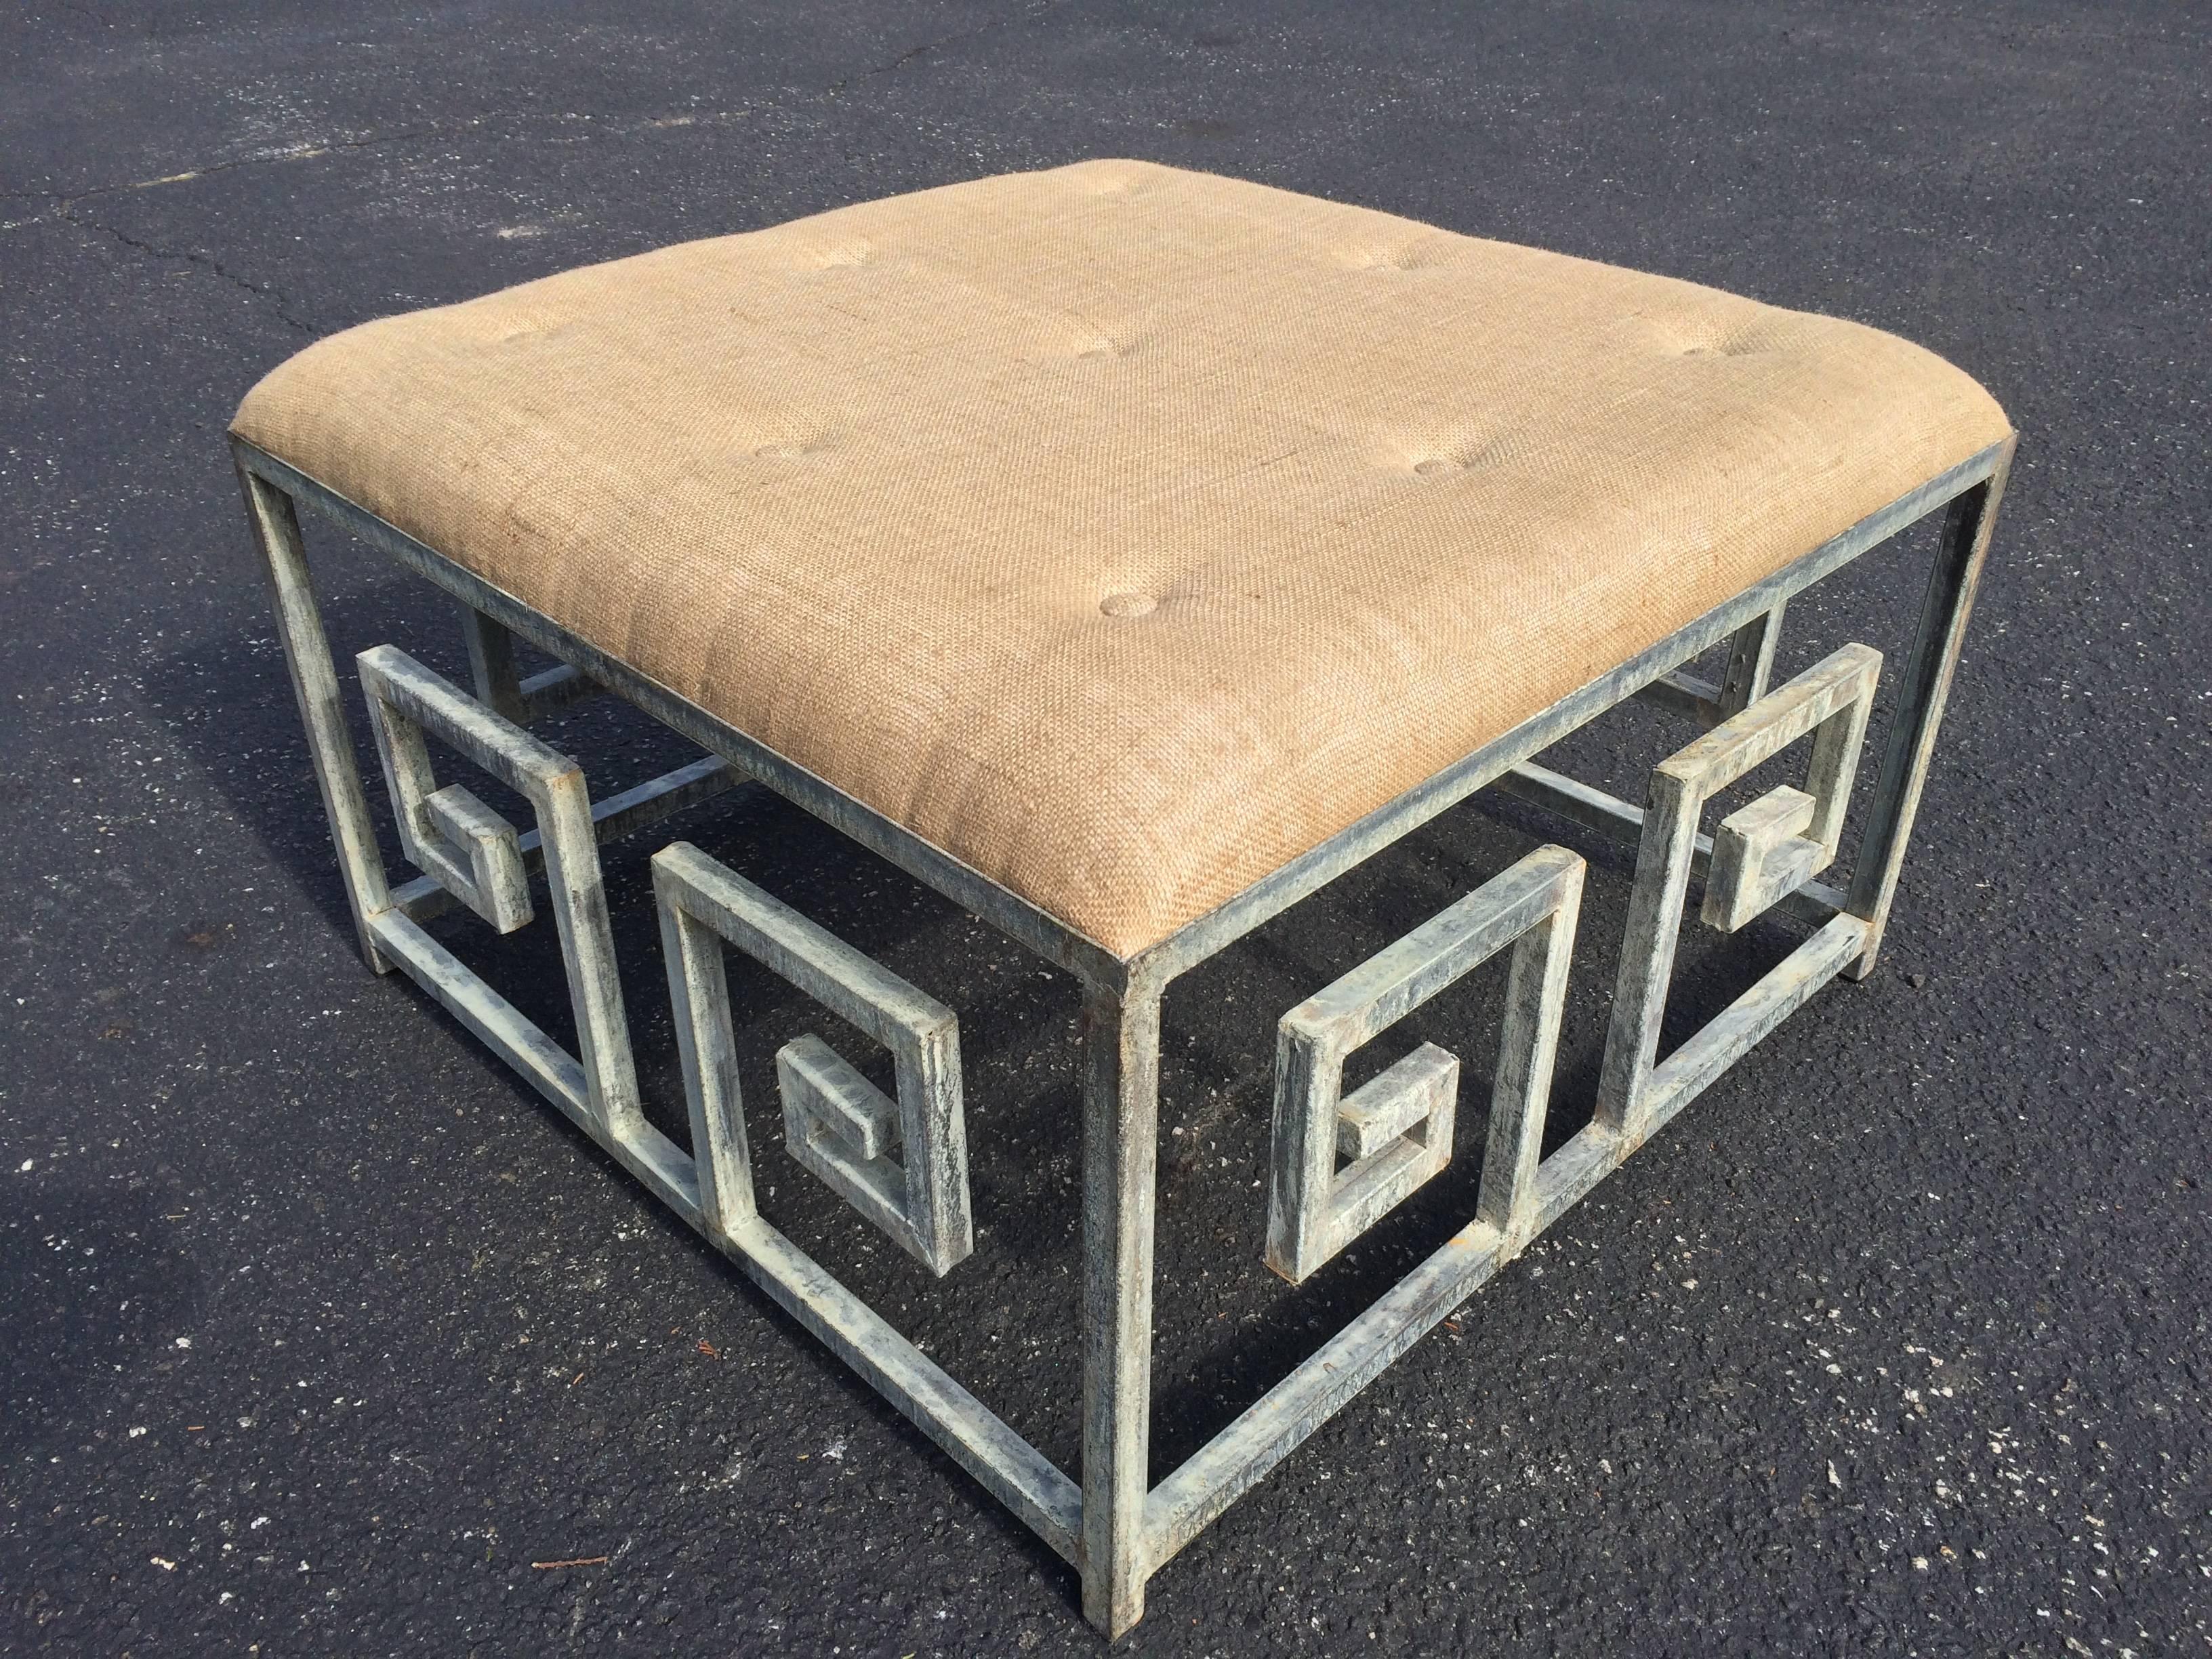 Greek key iron ottoman coffee table with patinated/weathered copper-like finish in Iron. Nice comfortable tufted burlap upholstery top. Casual but sophisticated. Item is new and unused. Only one available.